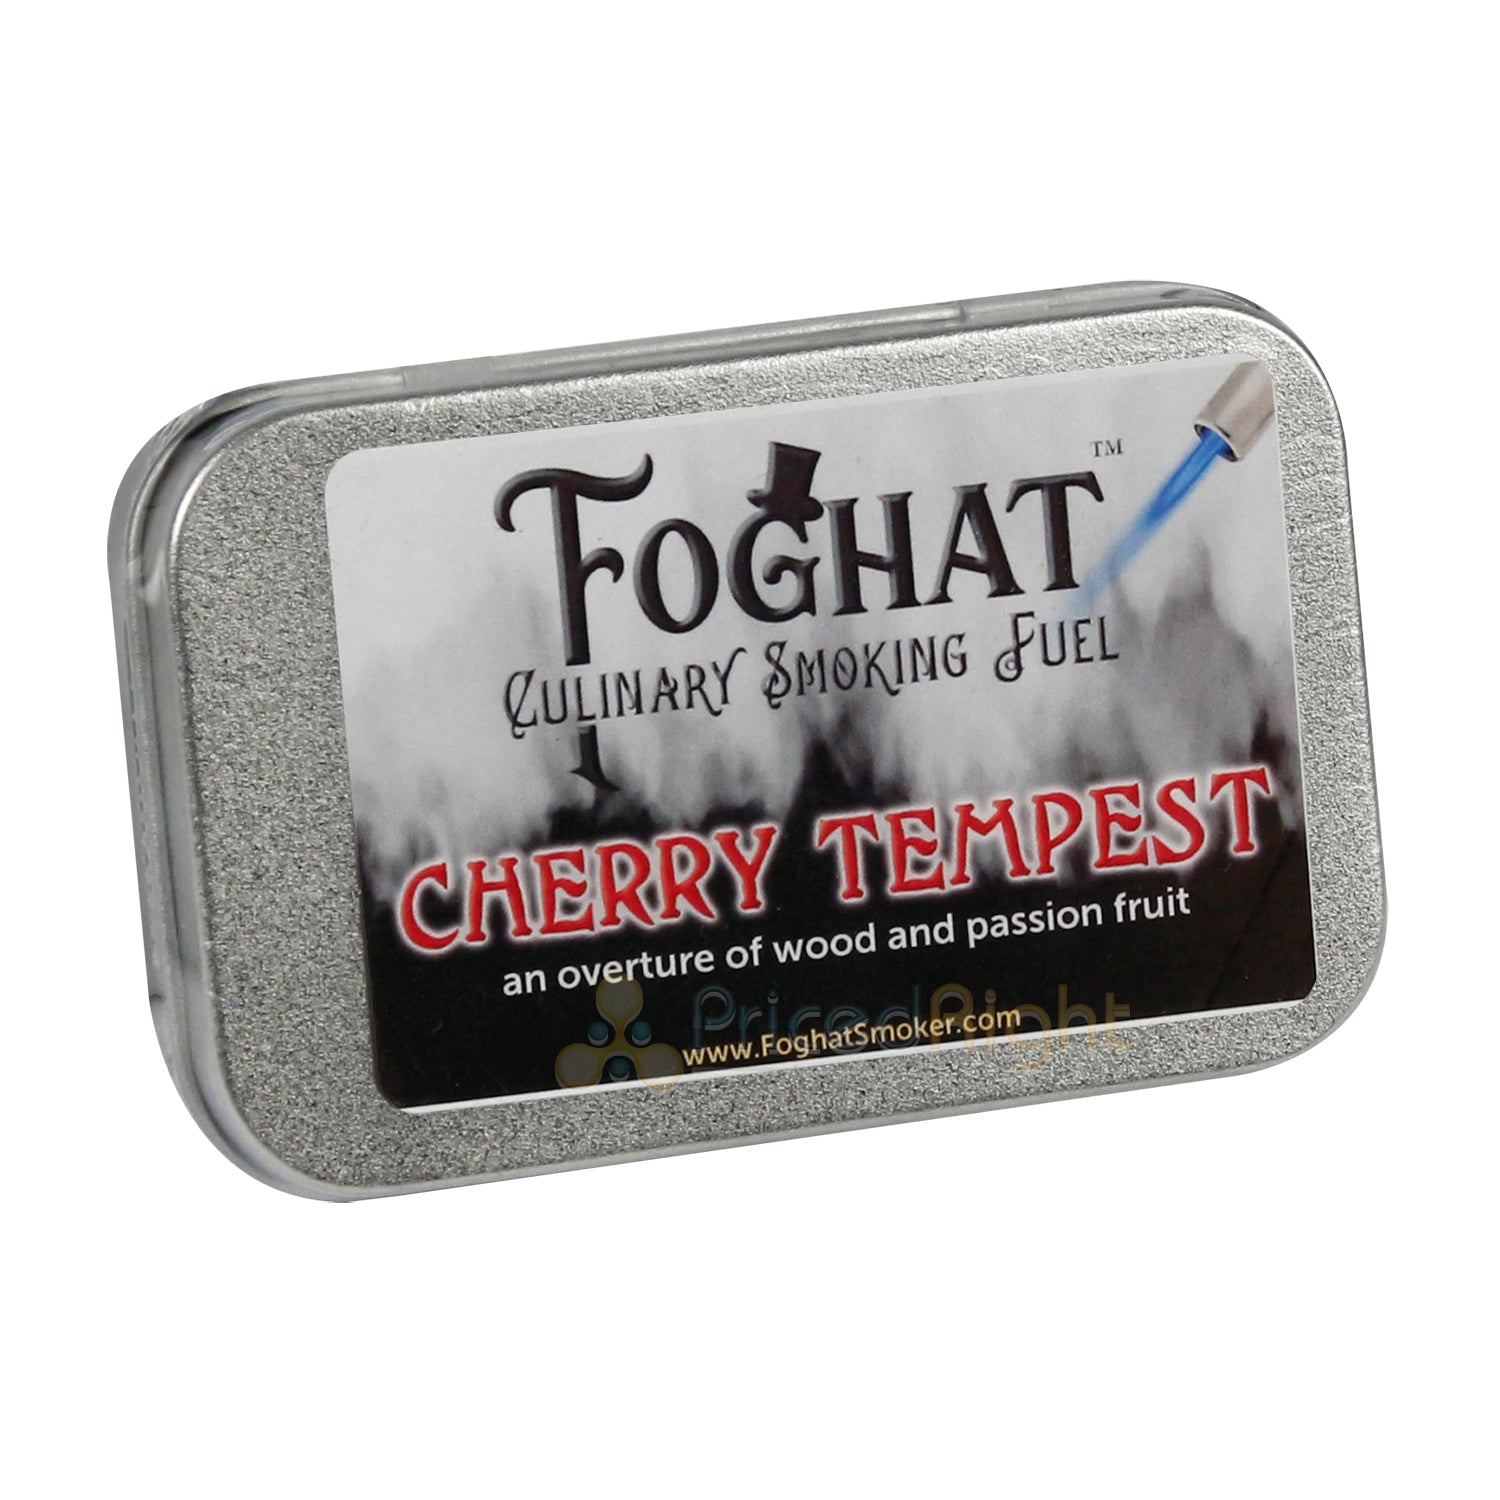 Foghat Culinary Smoking Fuel Cherry Tempest Sweet & Mild Flavor W/ Passion Fruit